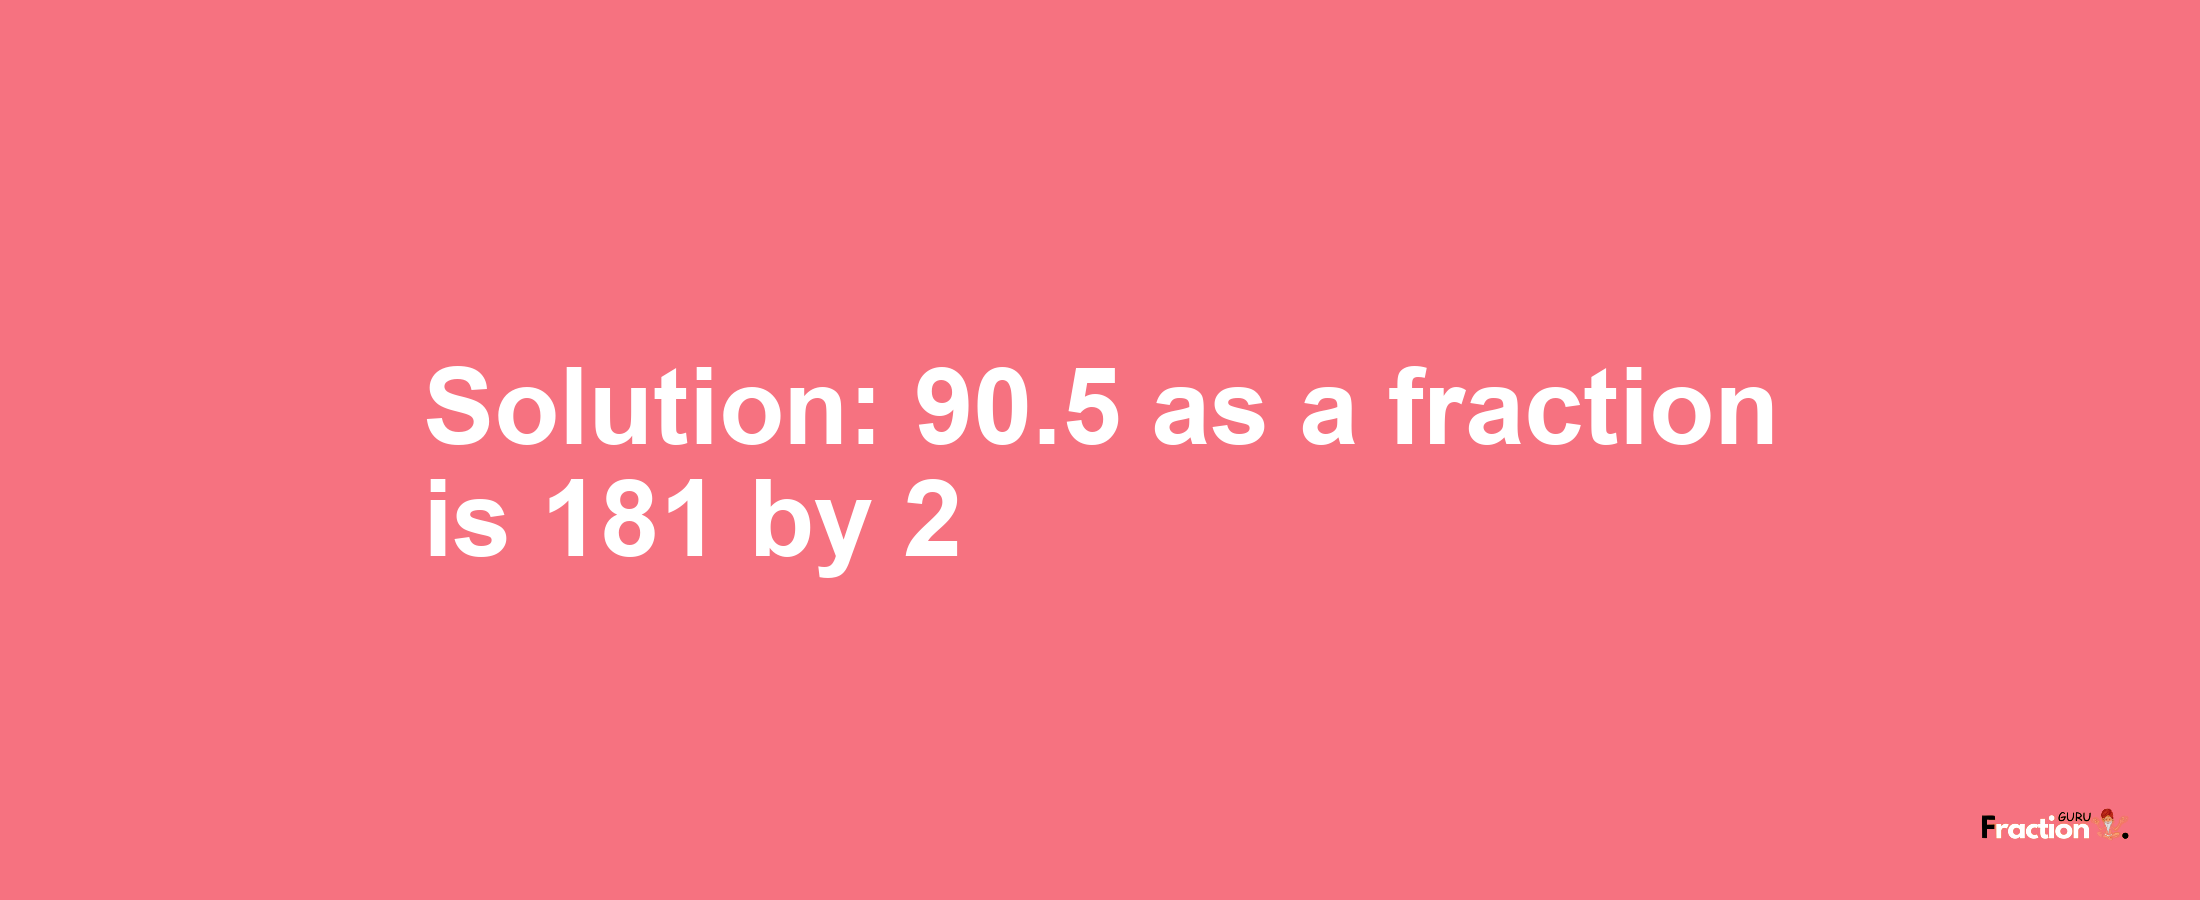 Solution:90.5 as a fraction is 181/2